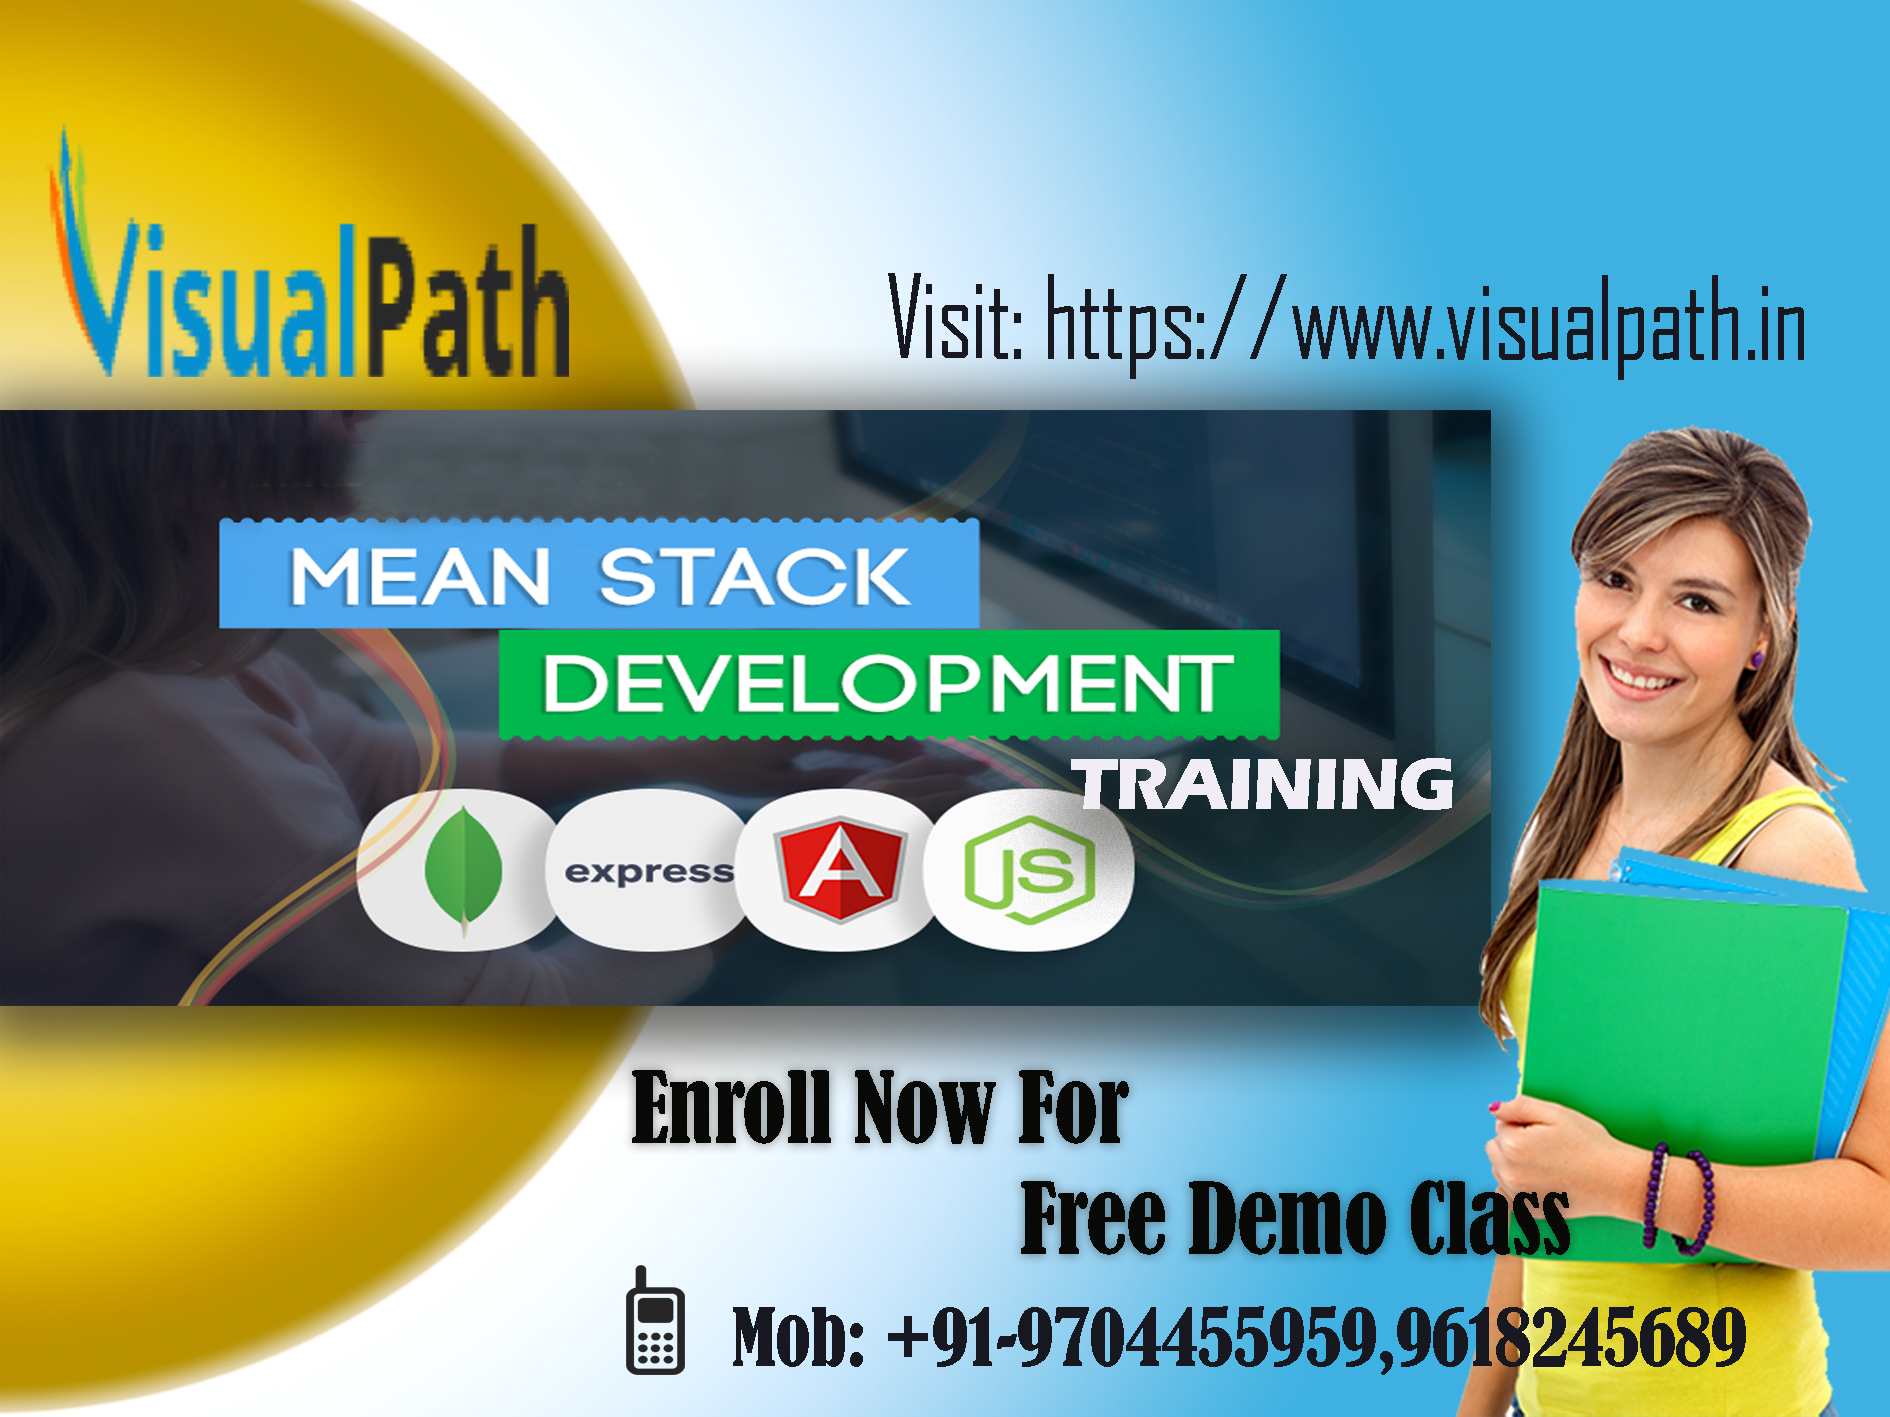 MEAN Stack Training Course | Best MEAN Stack Training - Visualpath, Hyderabad, Andhra Pradesh, India